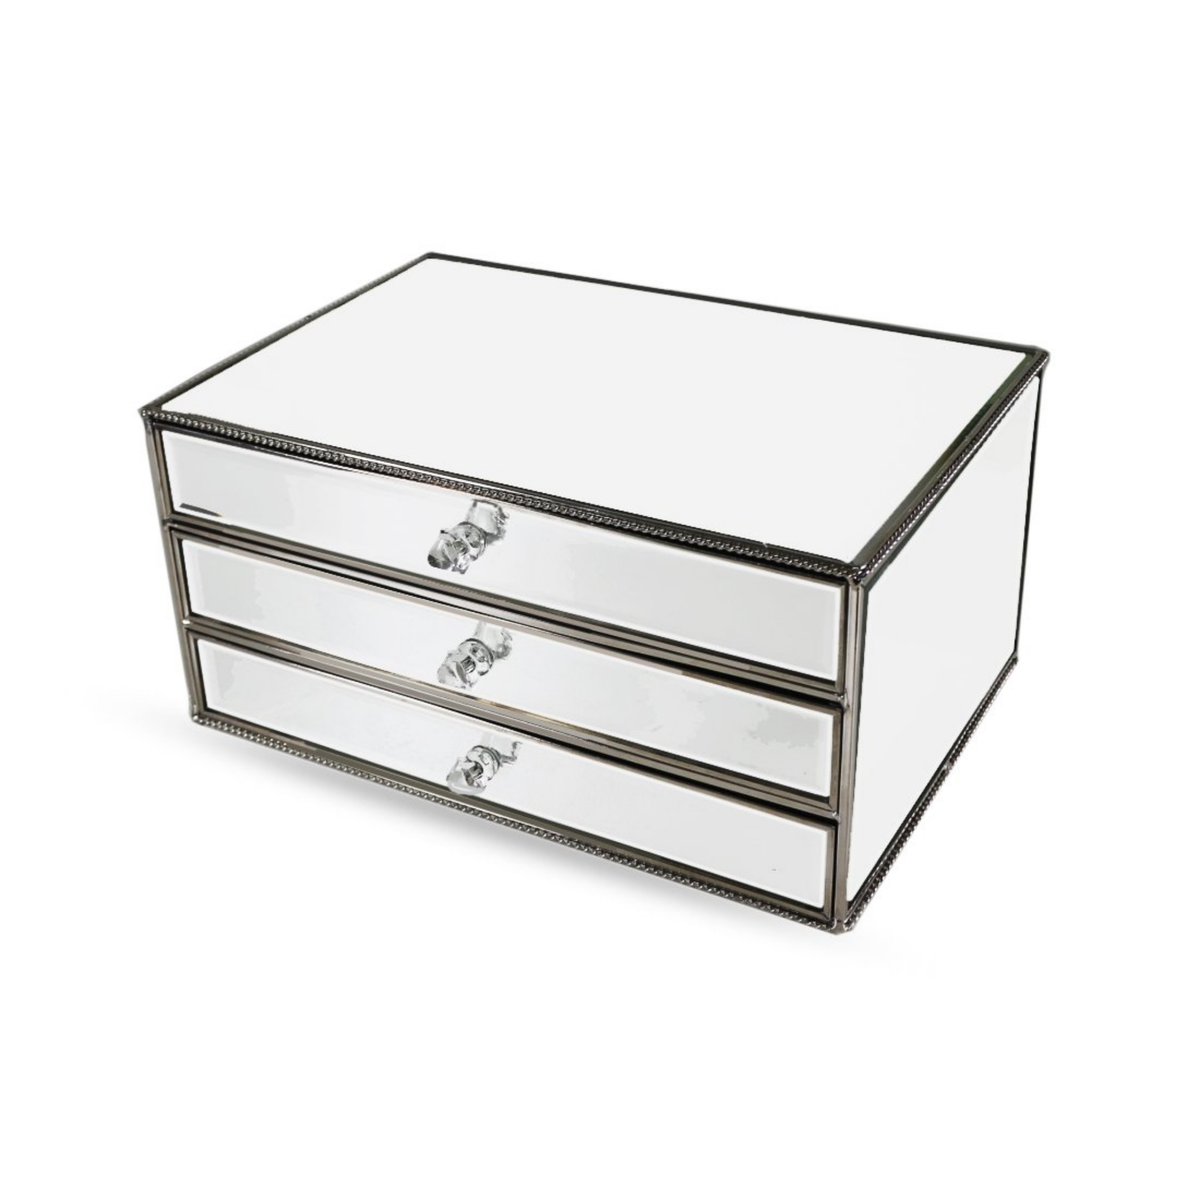 SILVER STRING JEWELLERY BOX - 3 DRAWERS